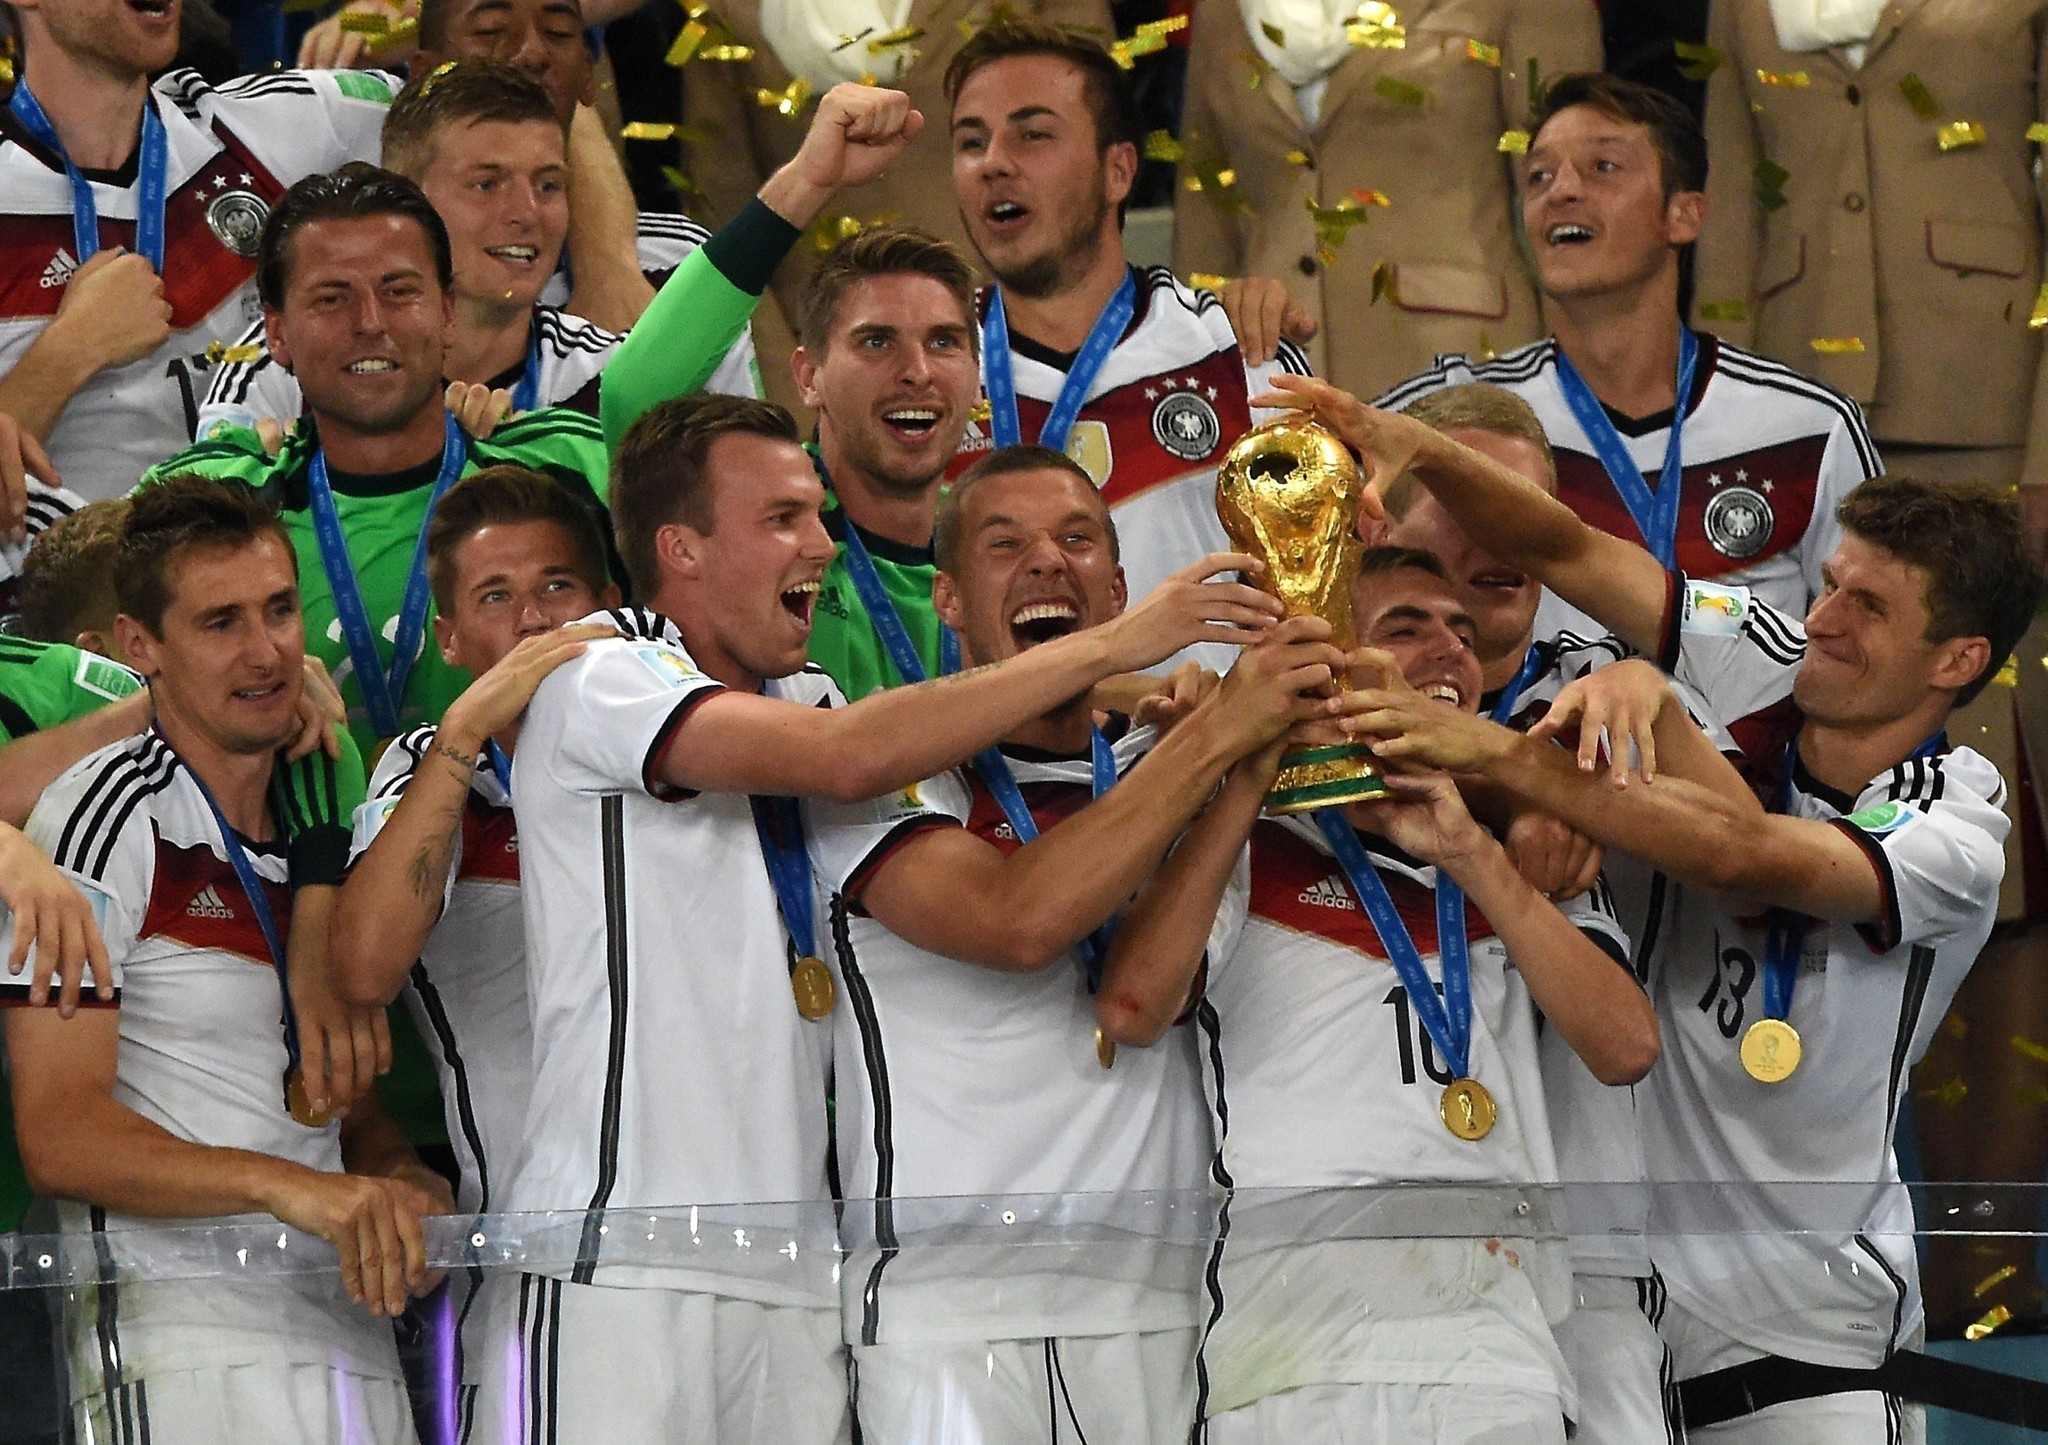 Germany wins fourth World Cup title by beating Argentina, 1-0 - LA Times